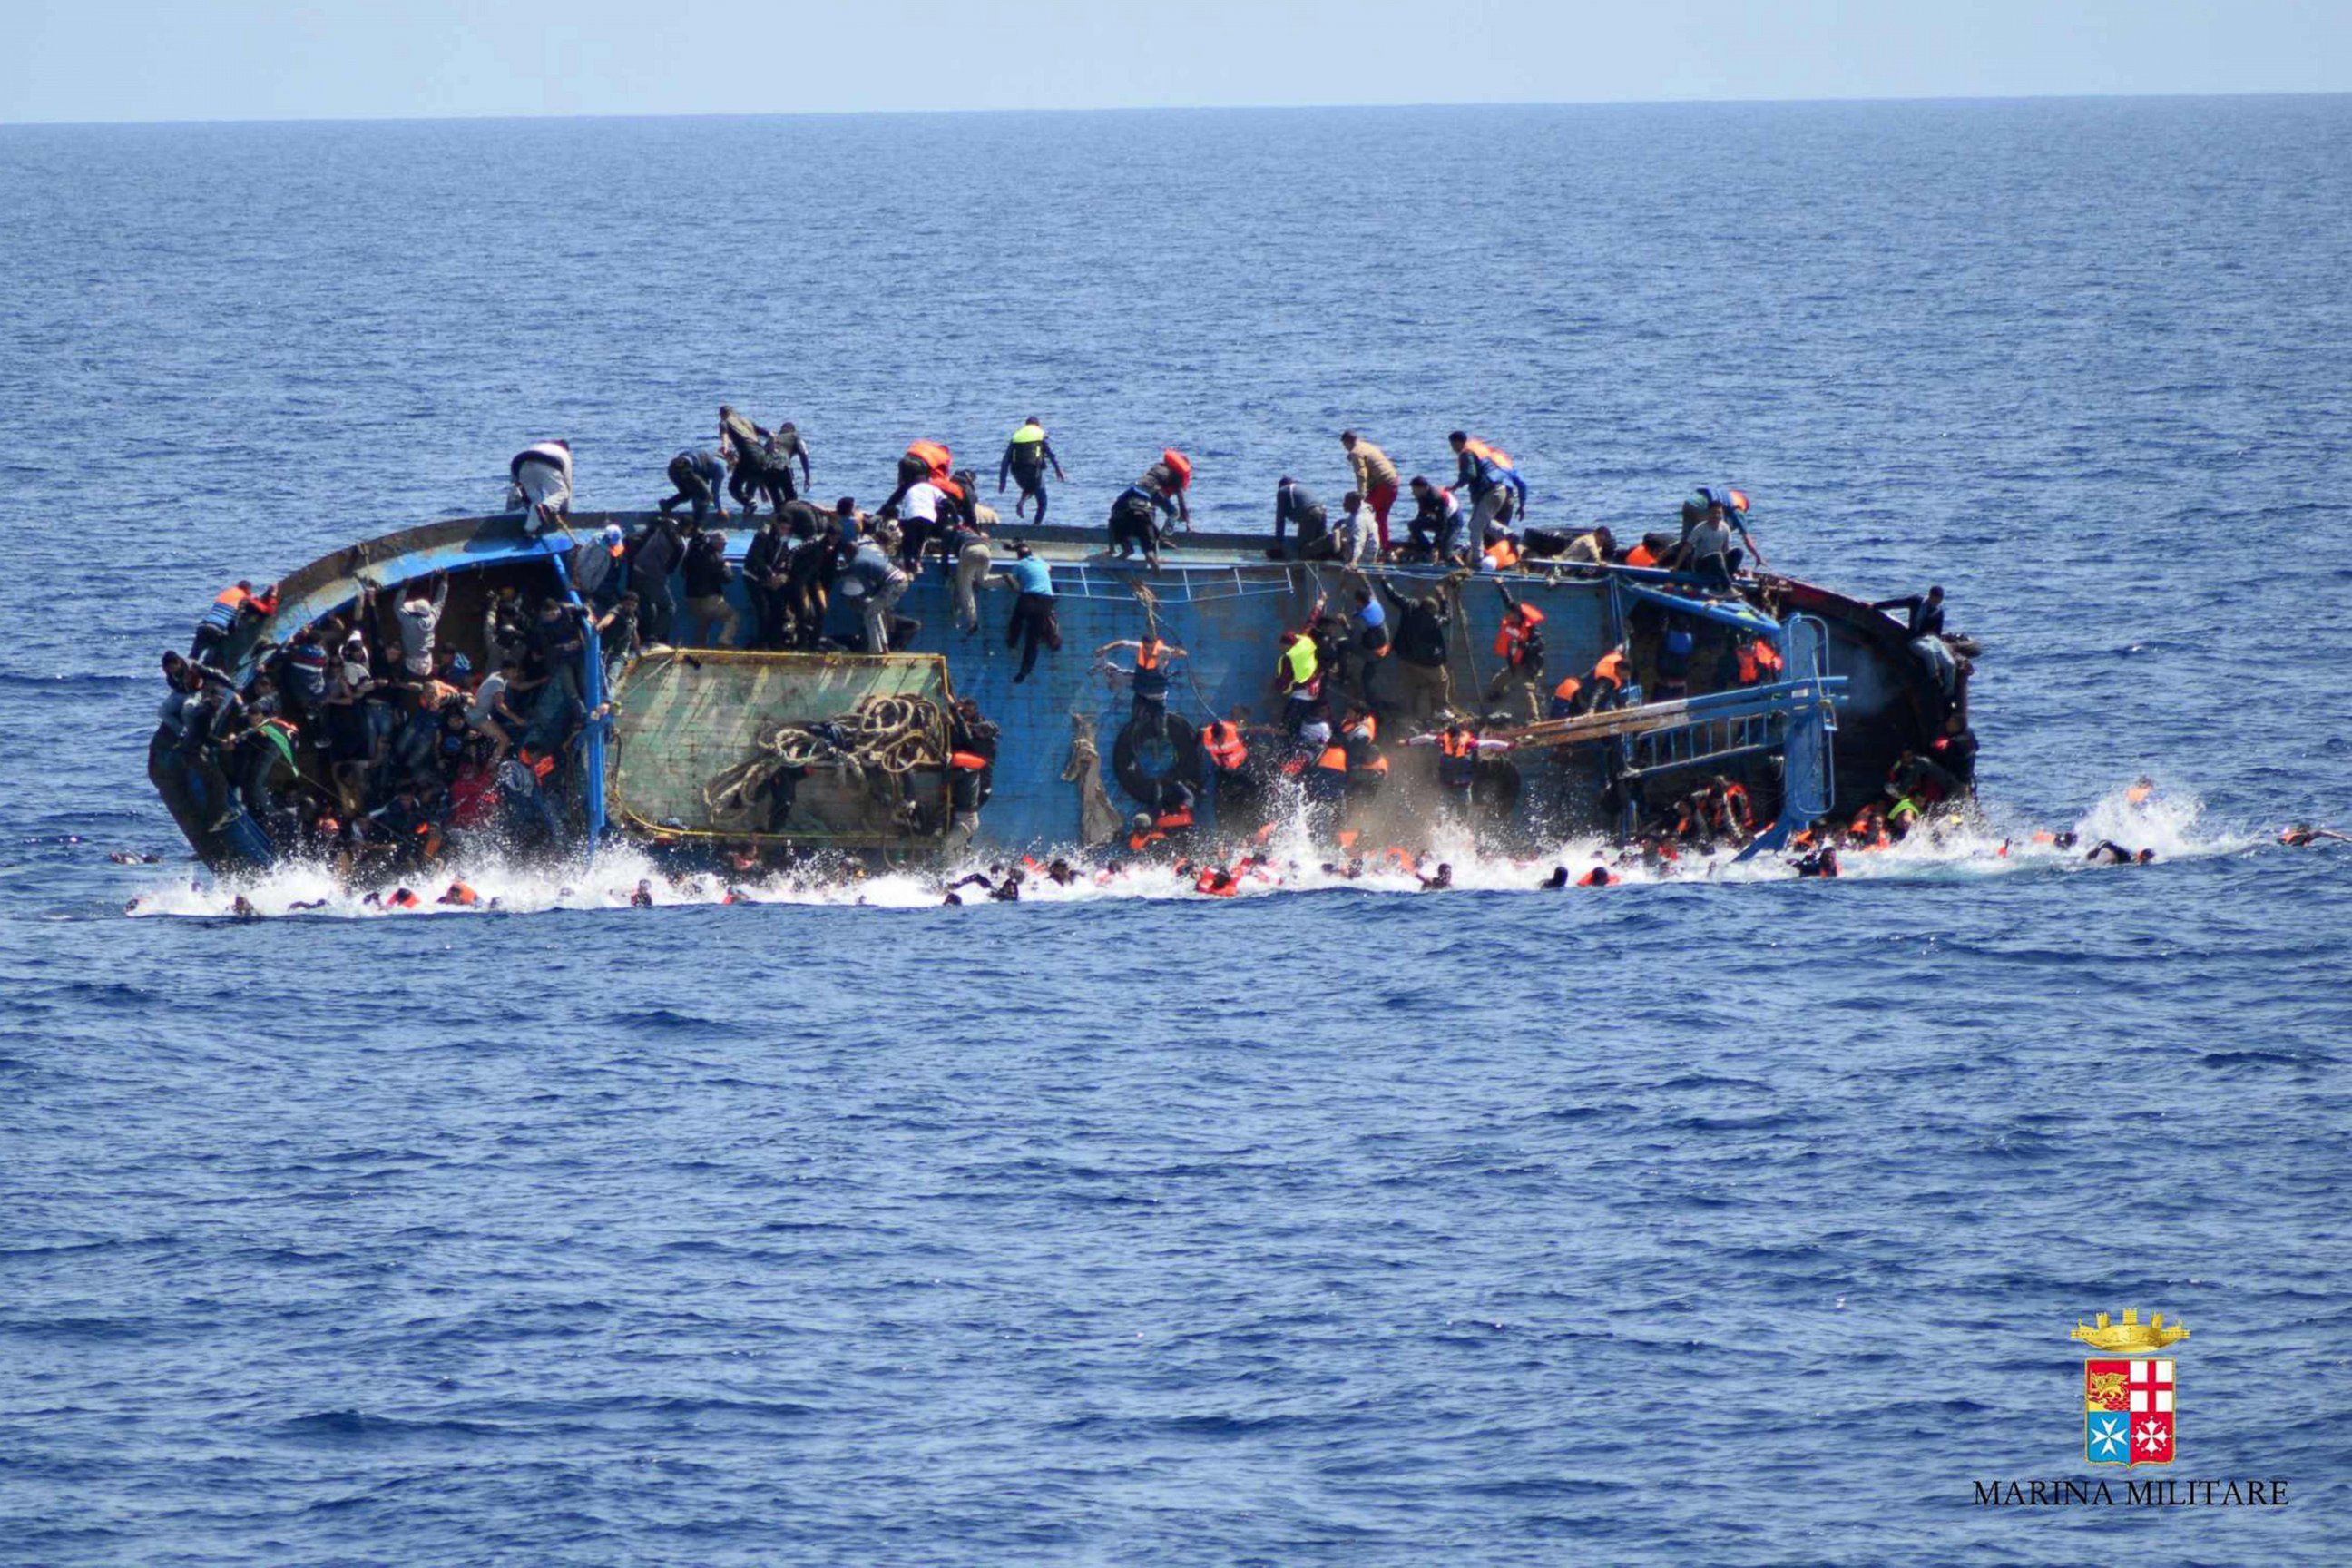 PHOTO: A handout picture from the Italian Navy shows the shipwreck of an overcrowded boat of migrants off the Libyan coast, May 25, 2016.